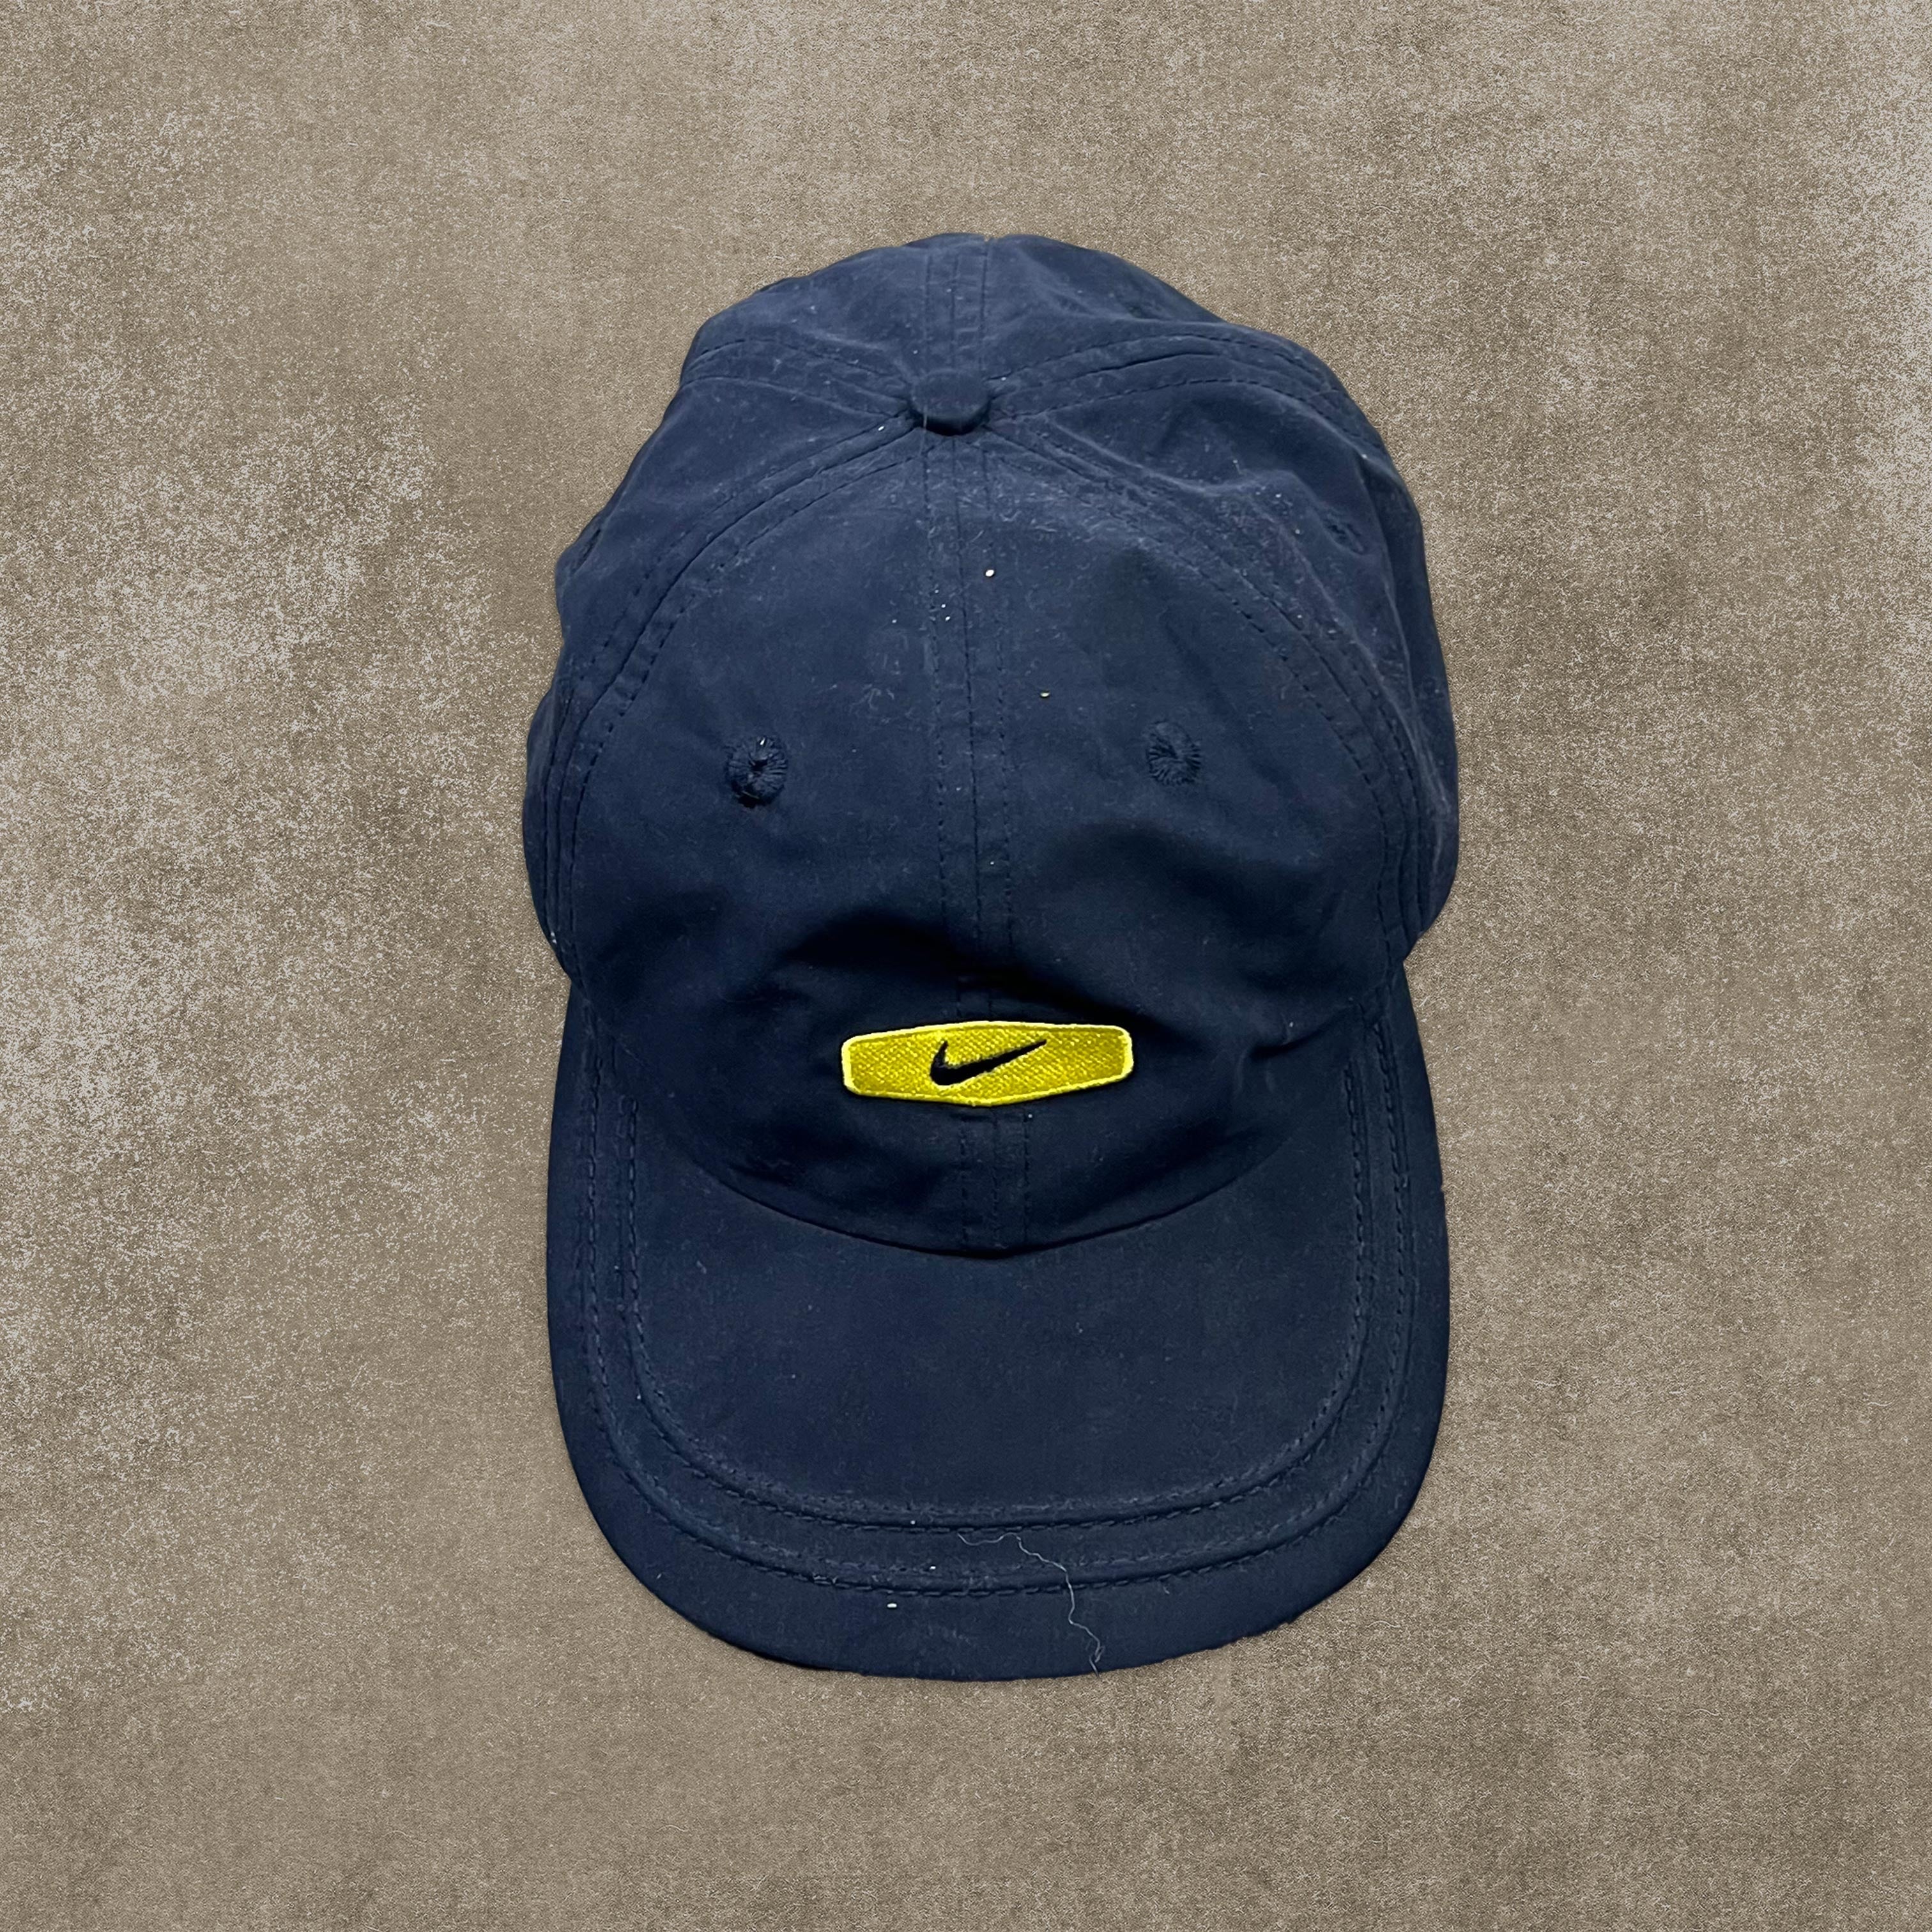 Nike RARE Navy Embroidered Spell Out Cap